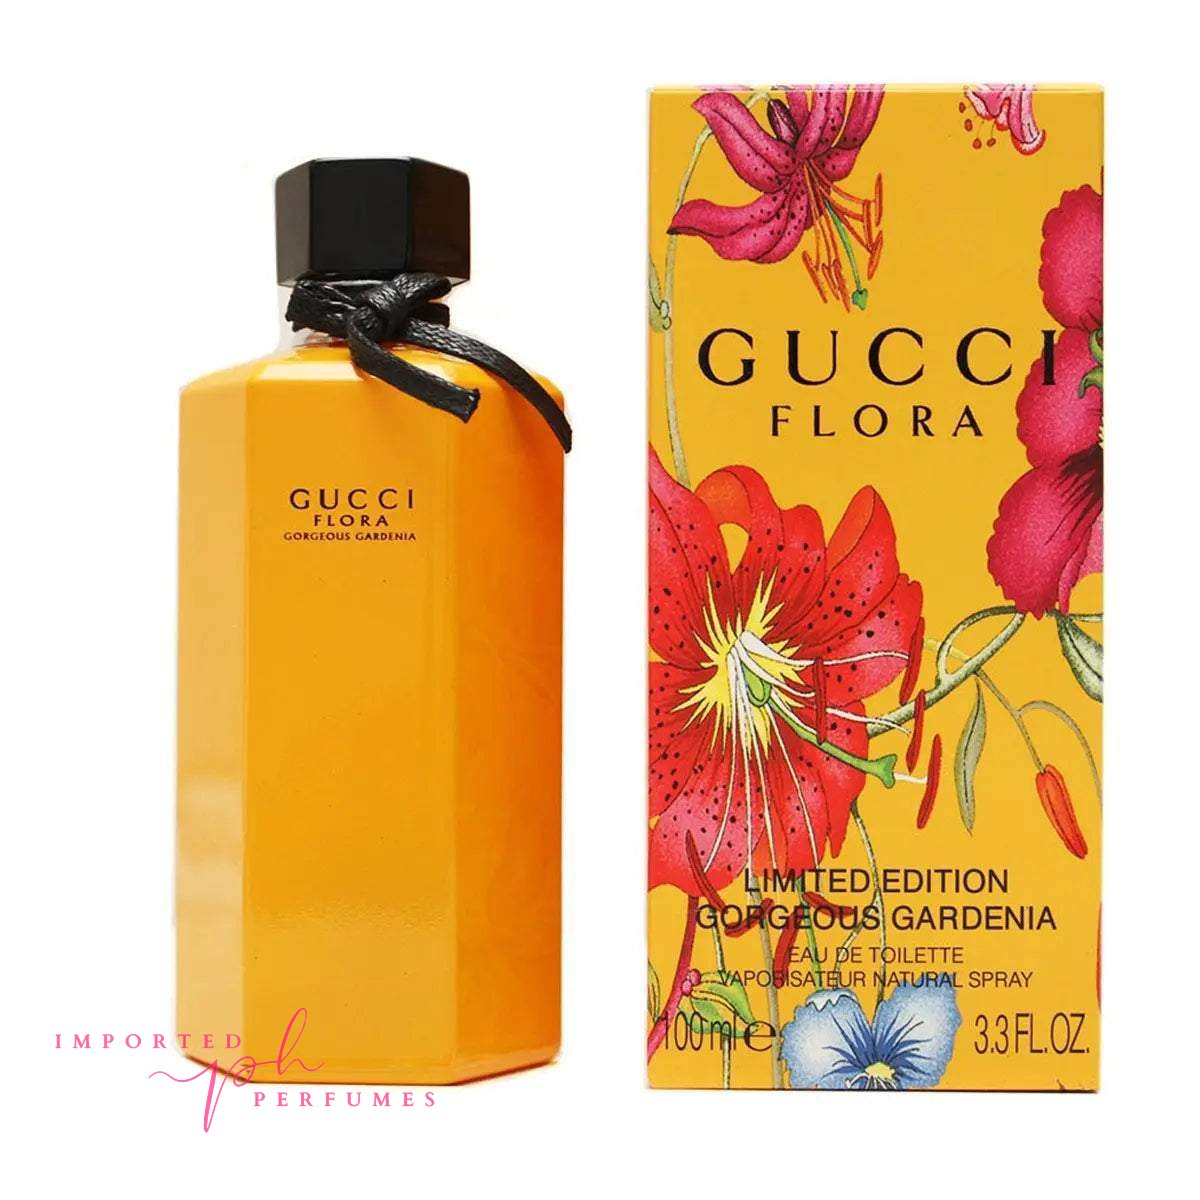 Gucci Flora Gorgeous Gardenia Limited Edition 2018 For Women 100ml-Imported Perfumes Co-Floral,Gucci,Limited Edittion,women,Yellow